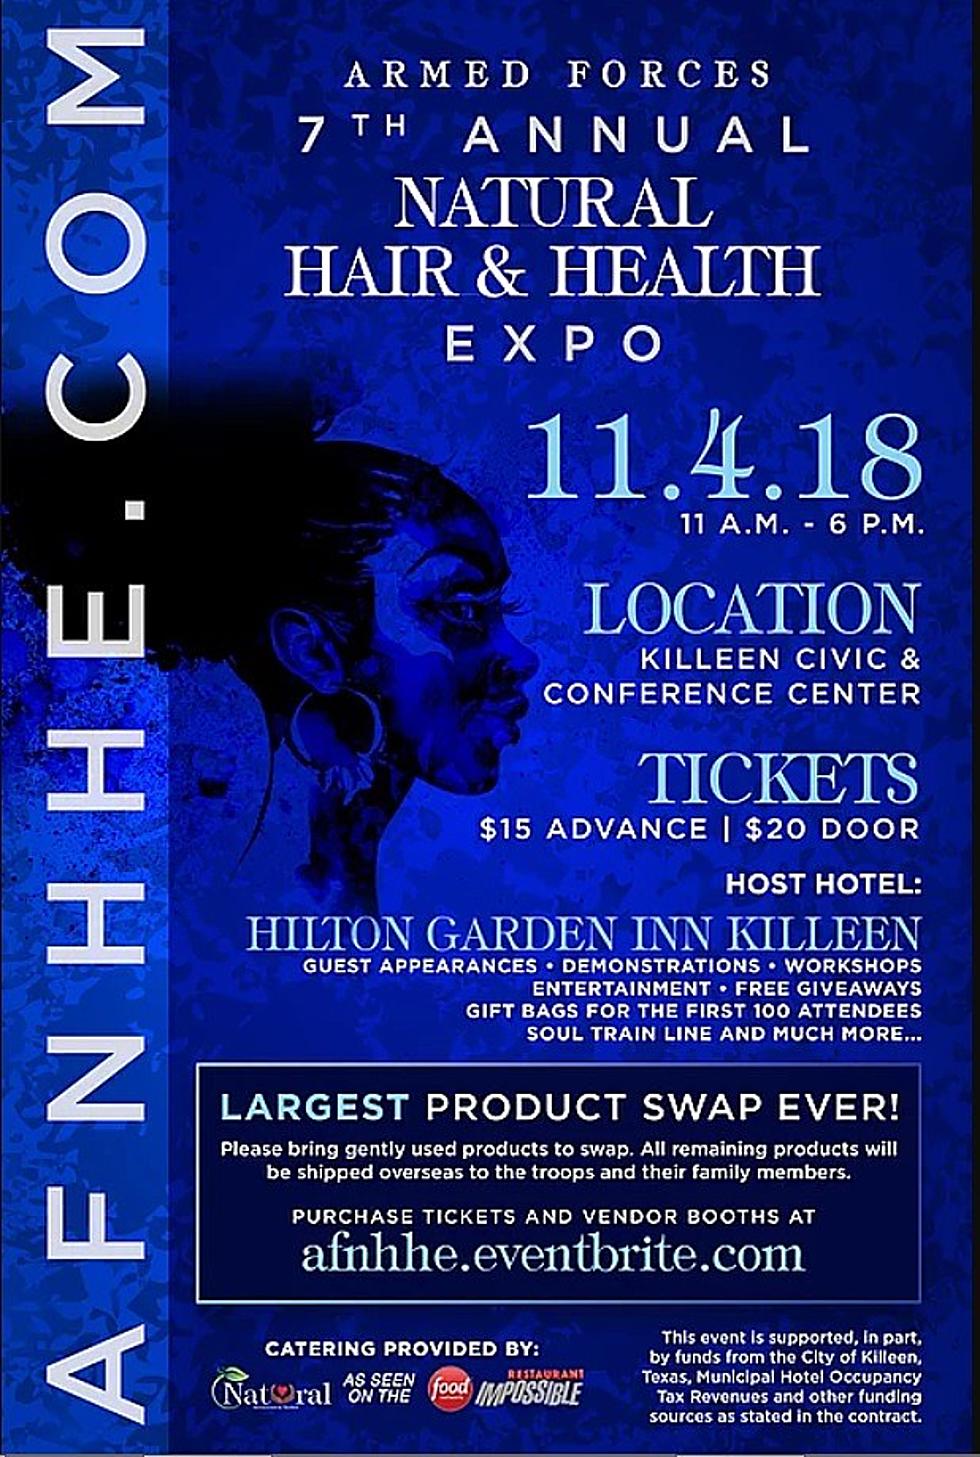 Get ready for The 7th Annual Armed Forces Natural Hair &#038; Health Expo!